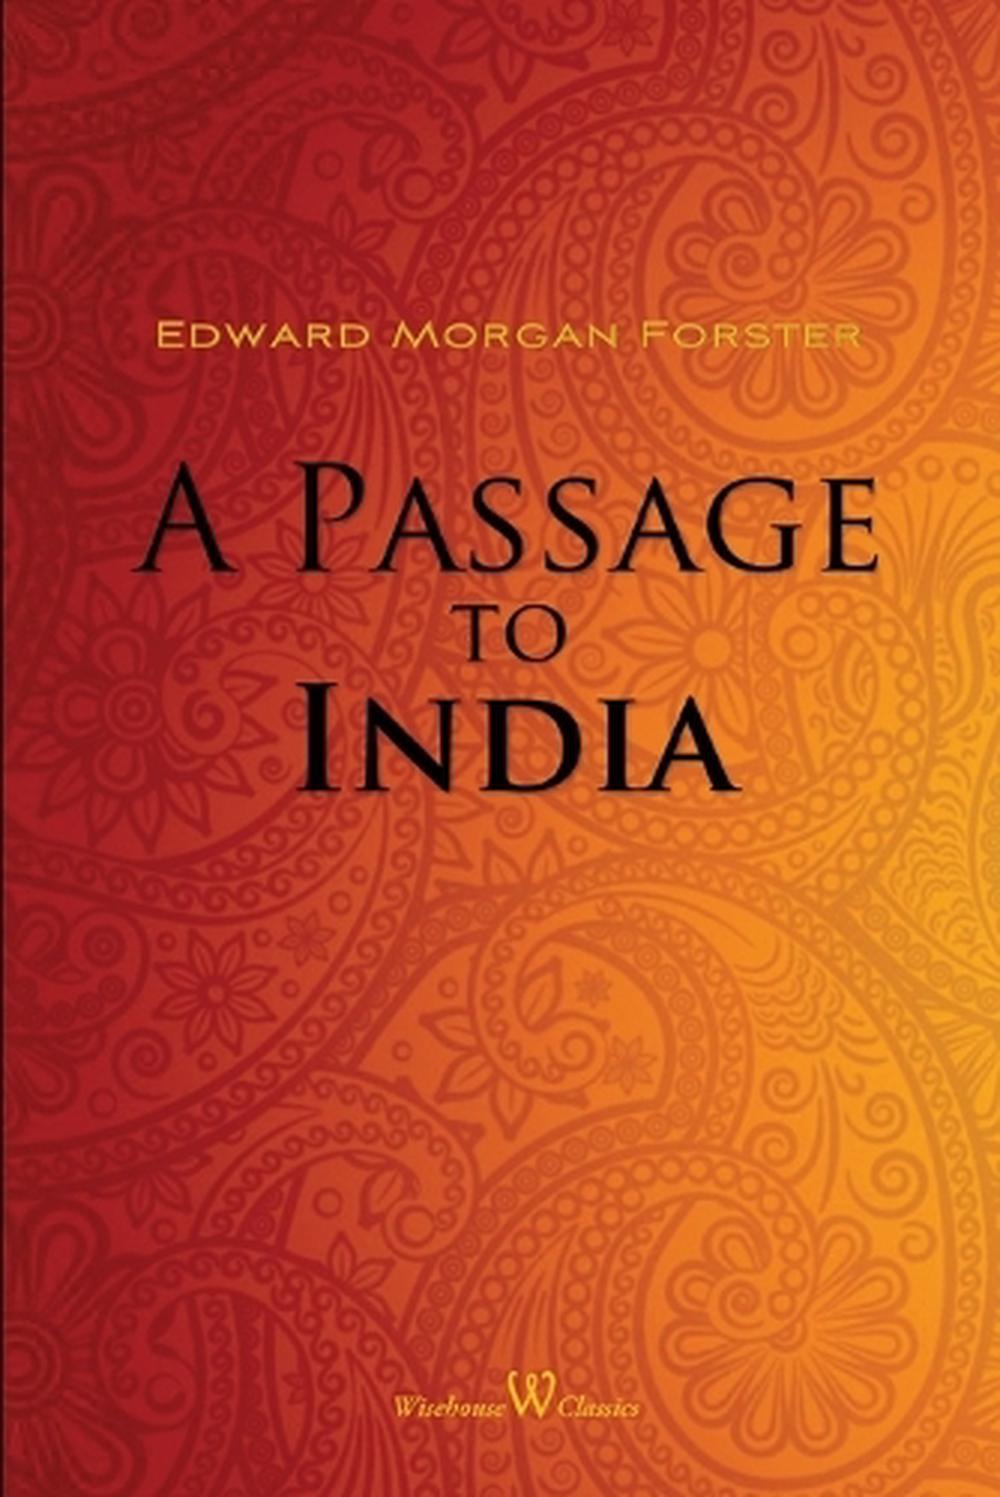 edward morgan forster a passage to india